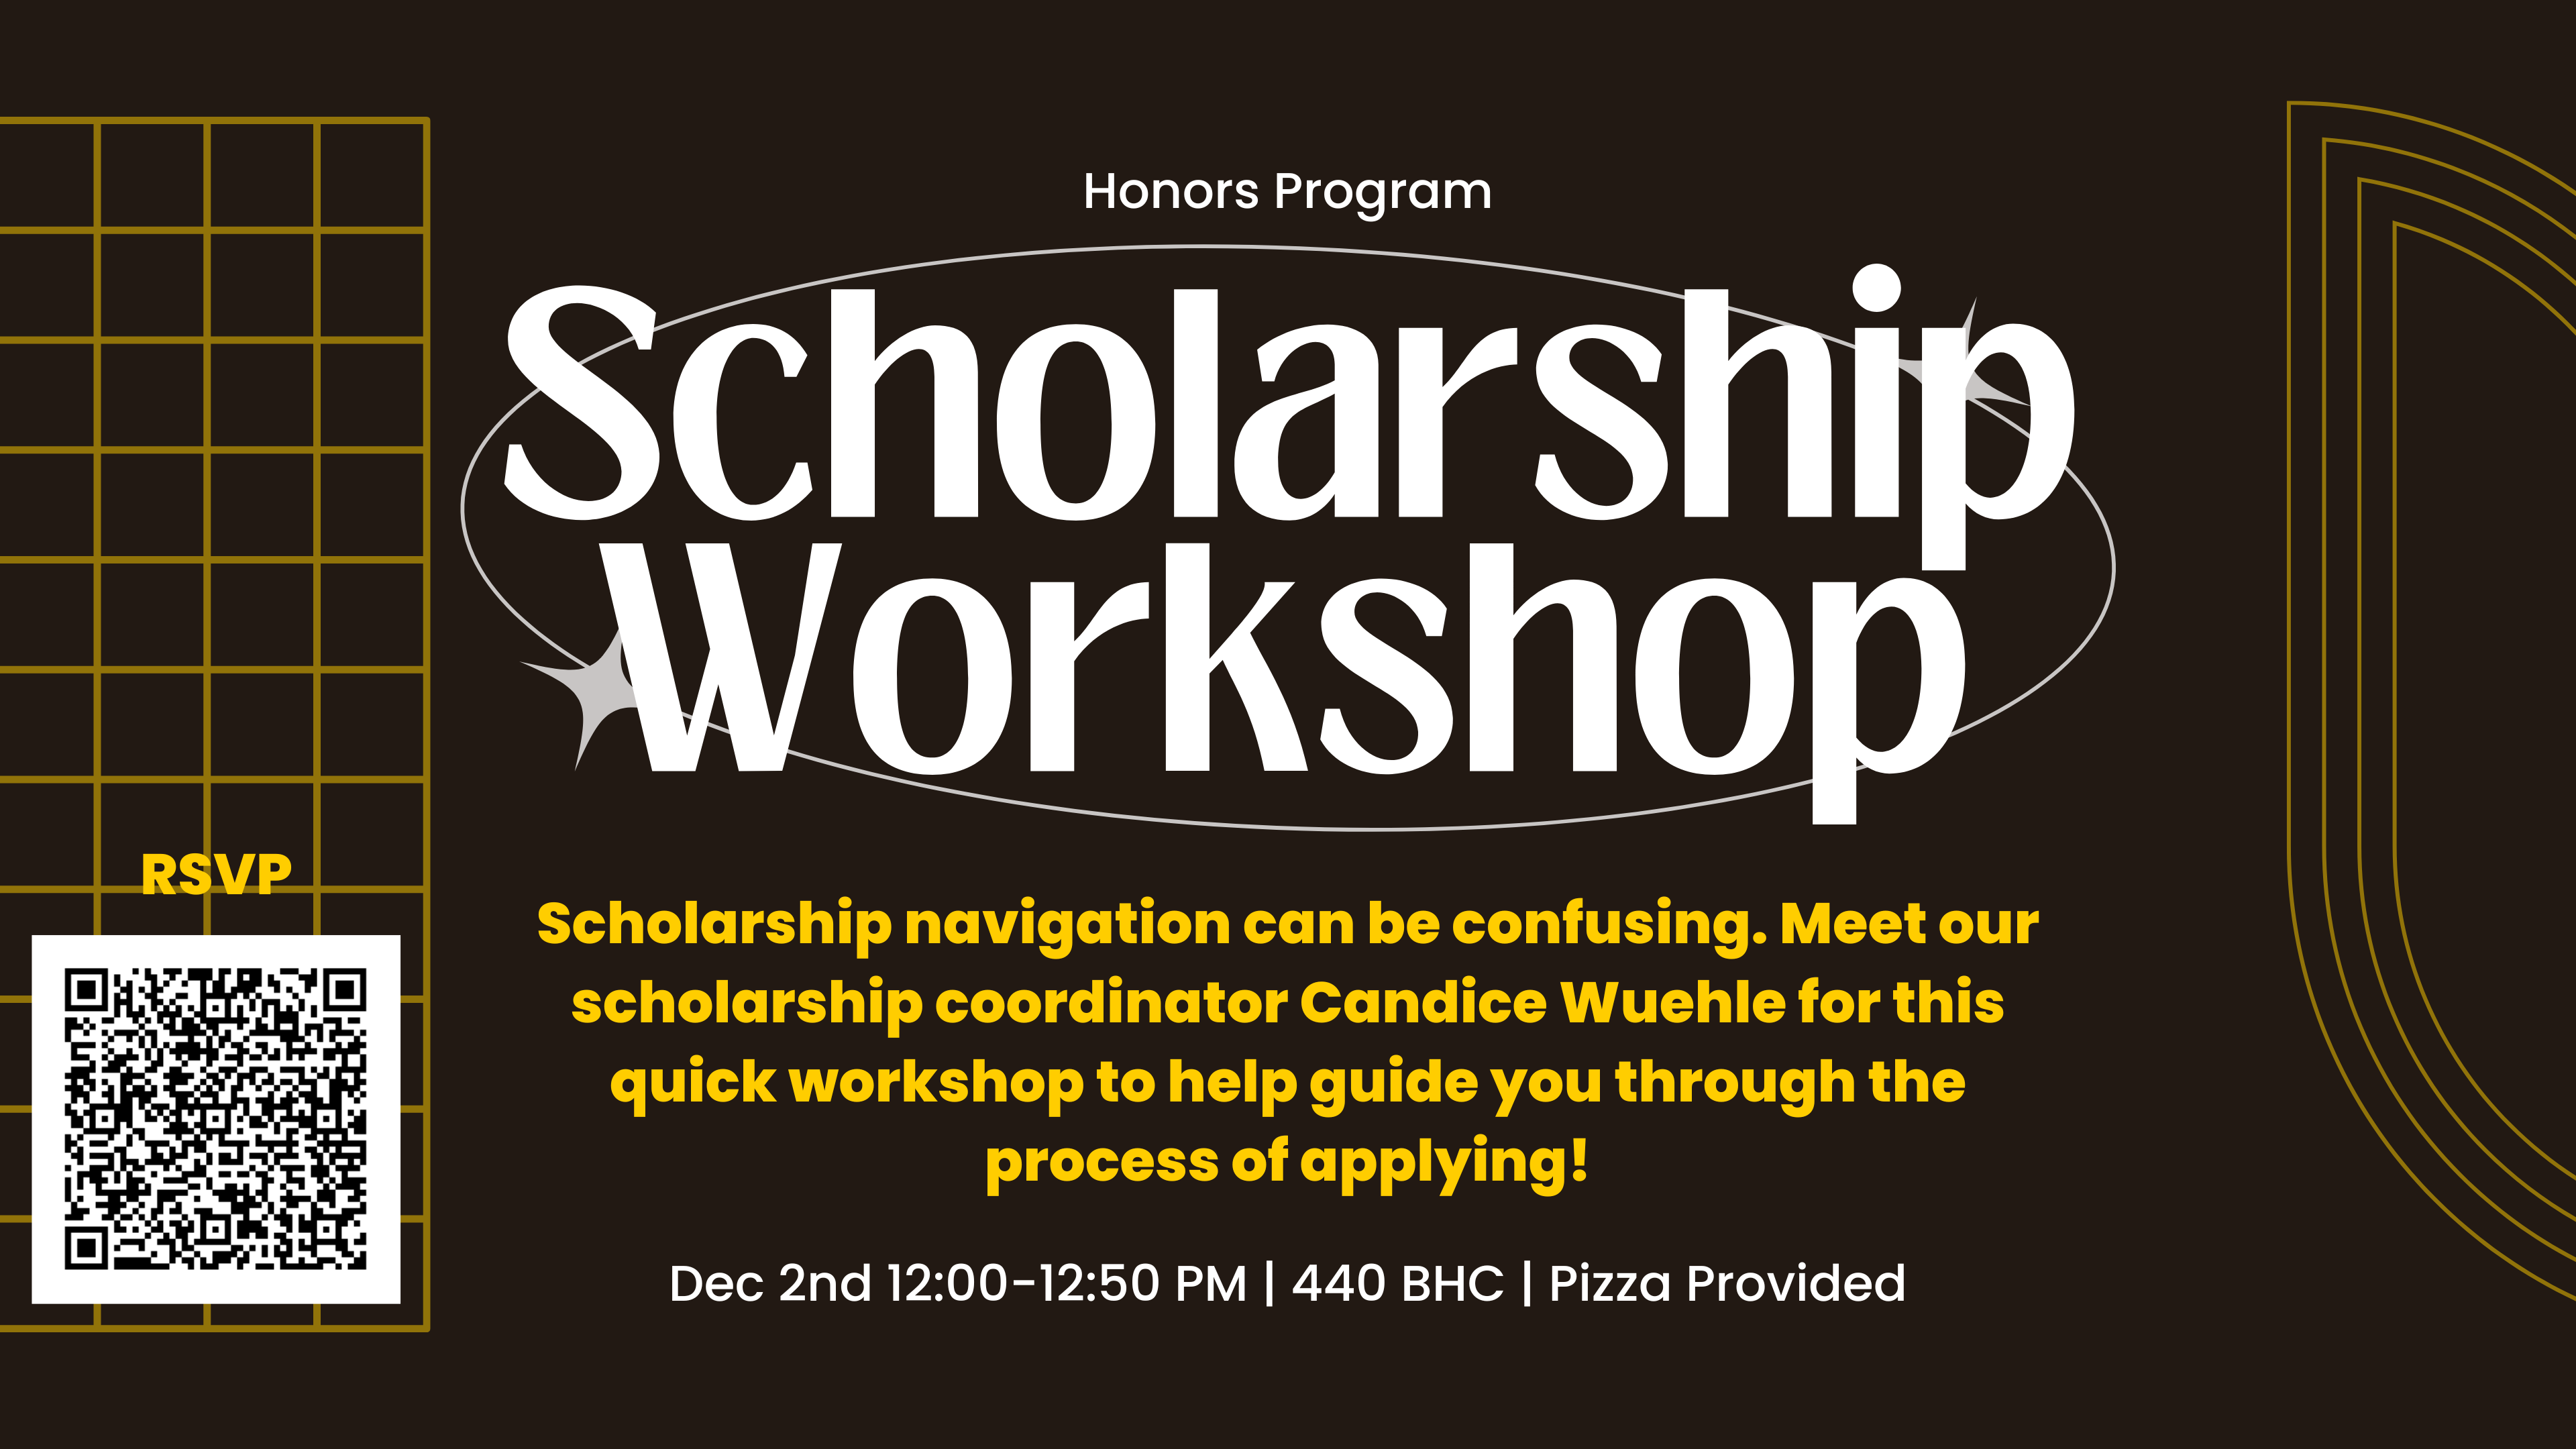 Scholarship workshop - December 2nd 12:00-12:50 PM in 440 BHC. Pizza provided. Please RSVP